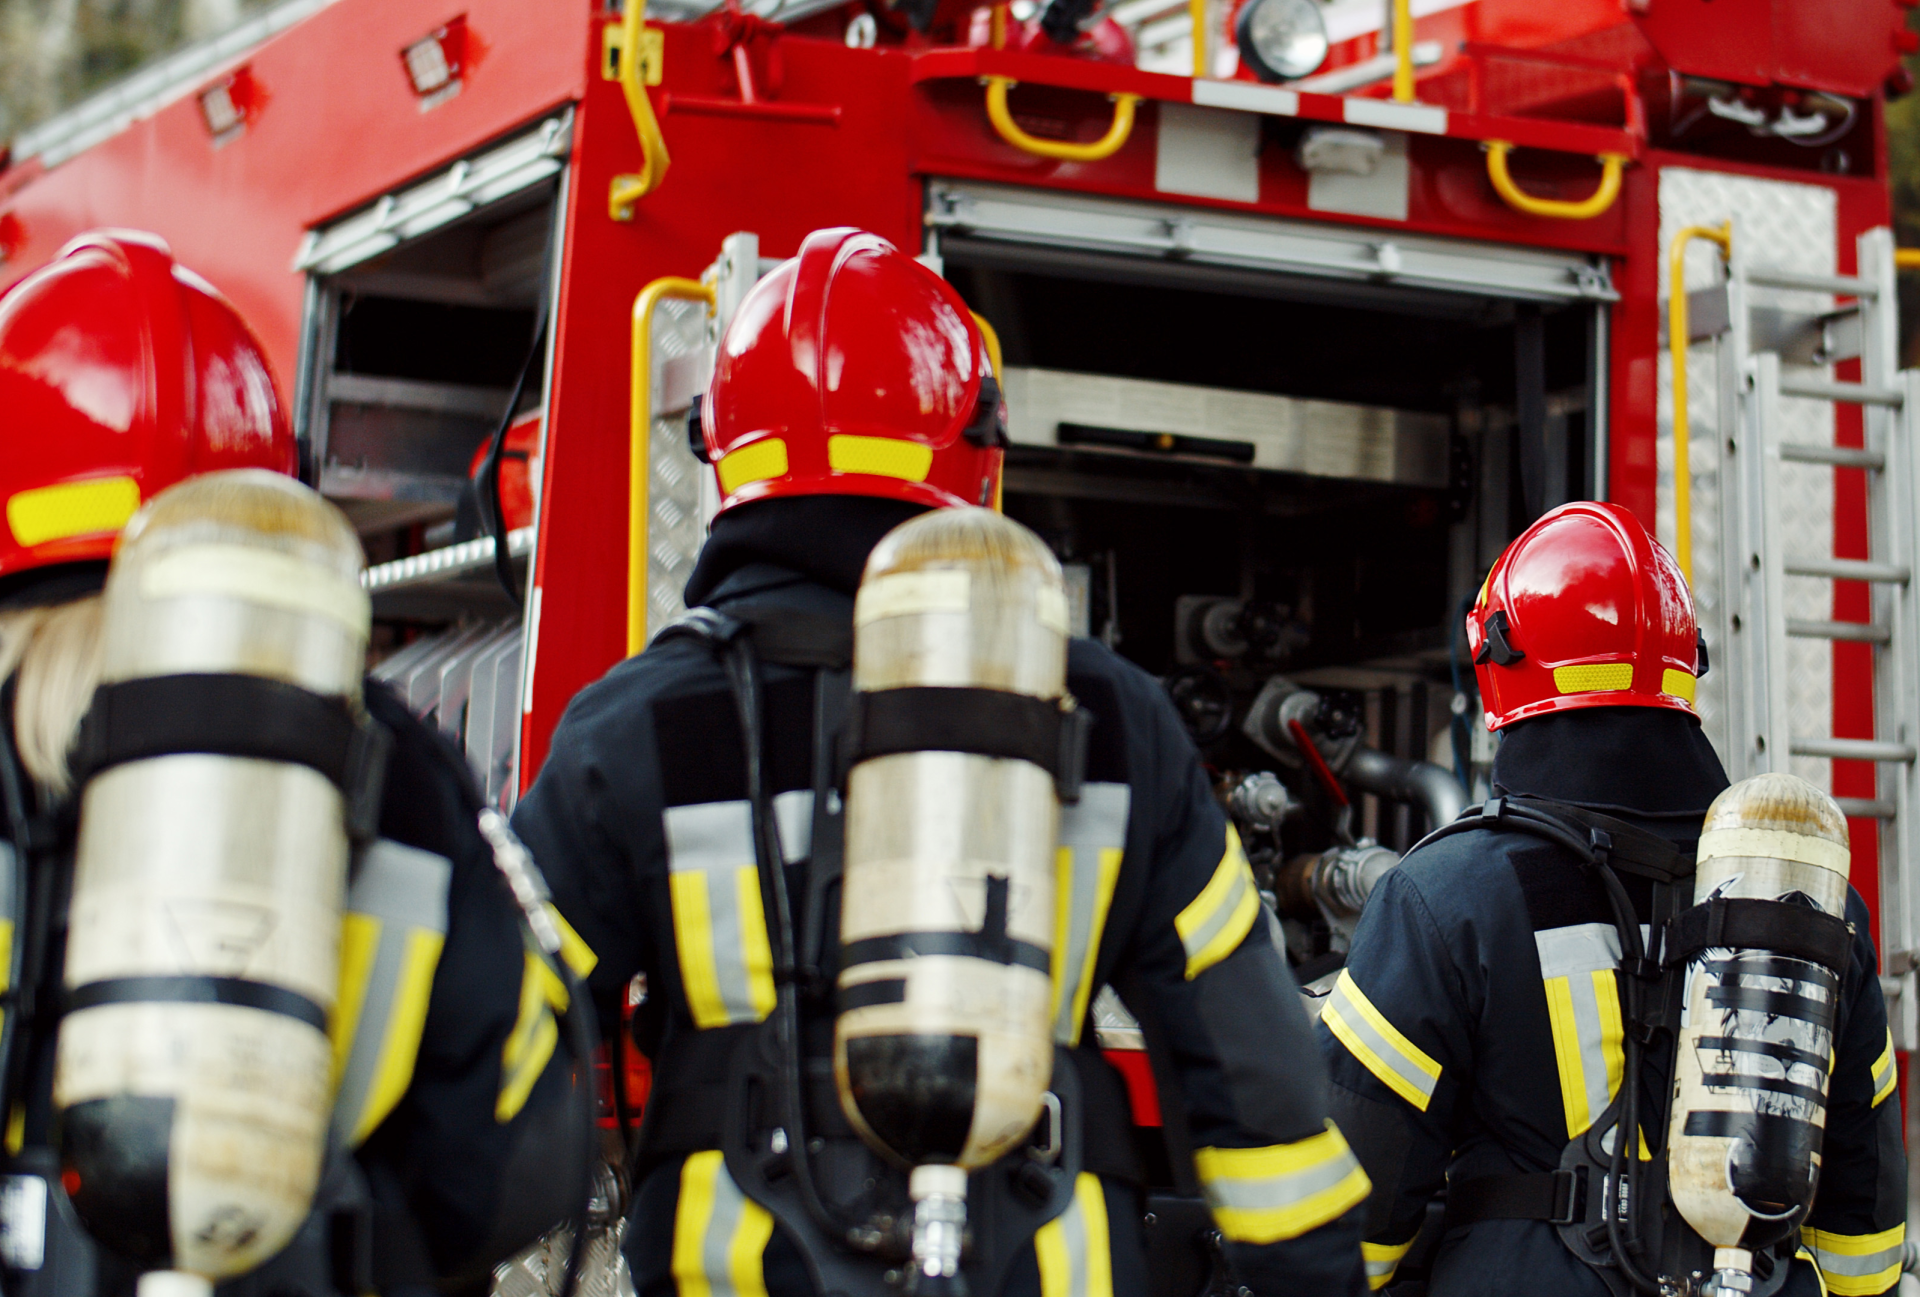 OUR SOLUTIONS FOR FIRE BRIGADES